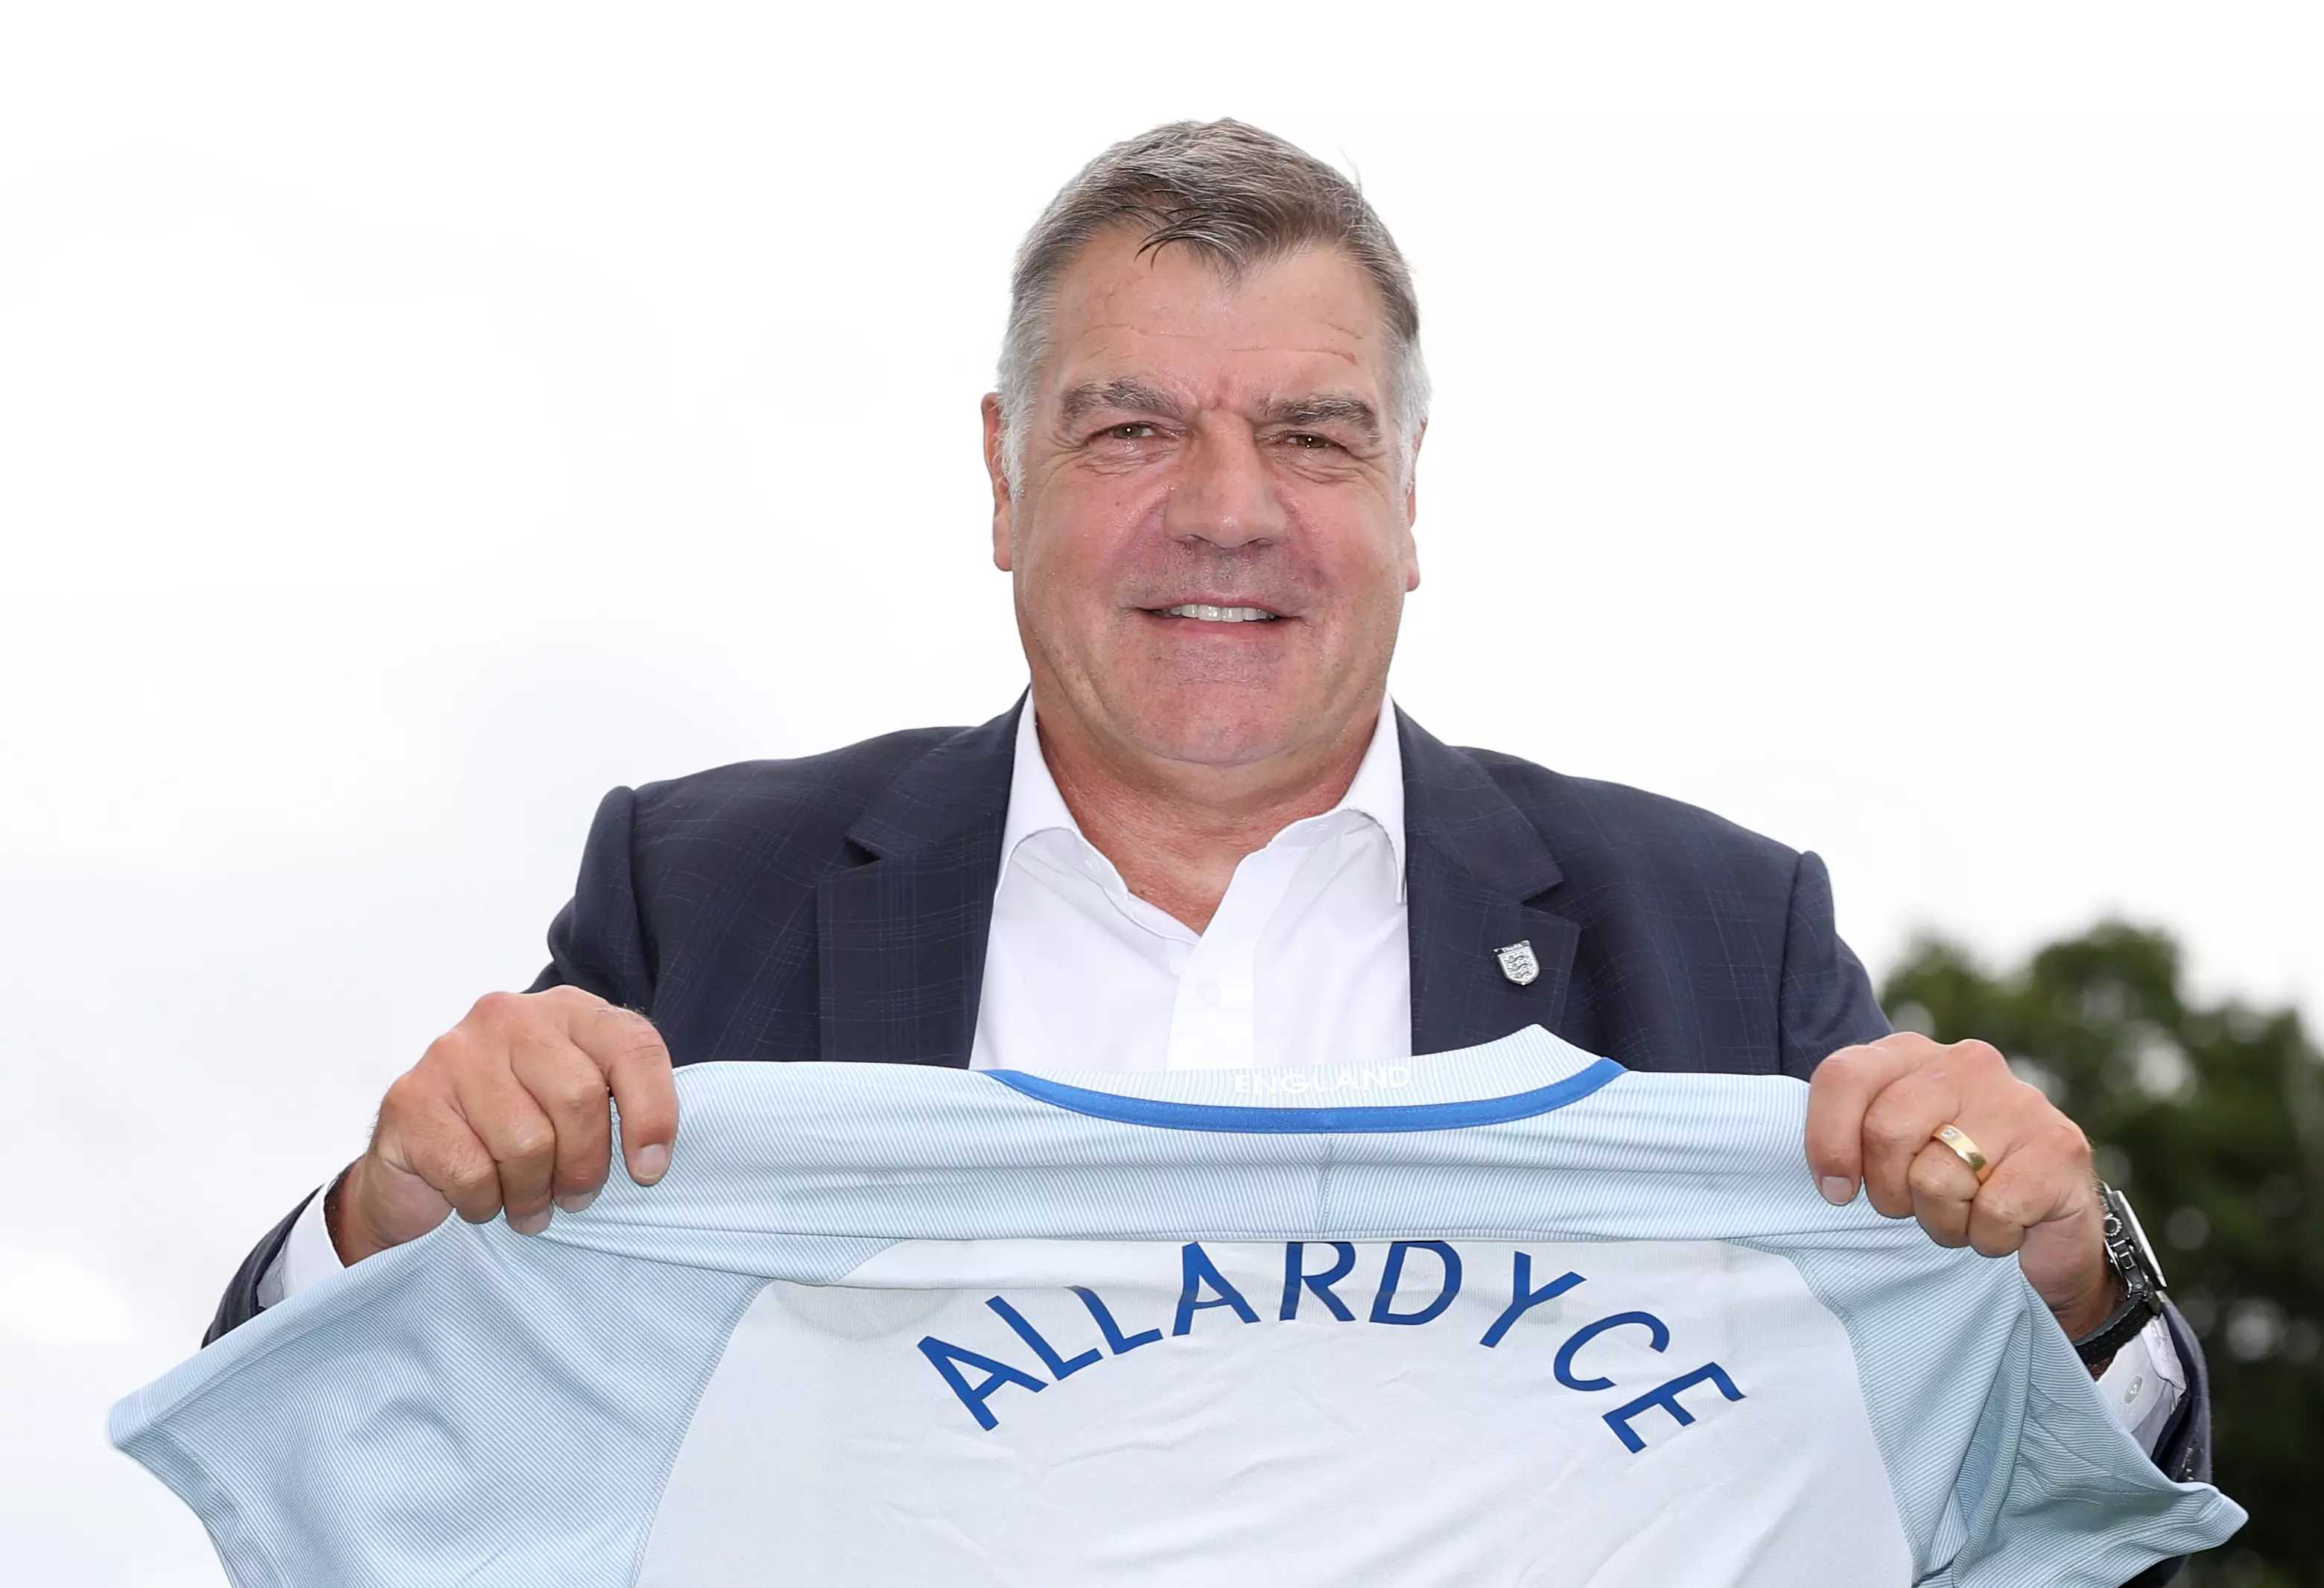 The FA Release Official Statement On The Future Of Sam Allardyce